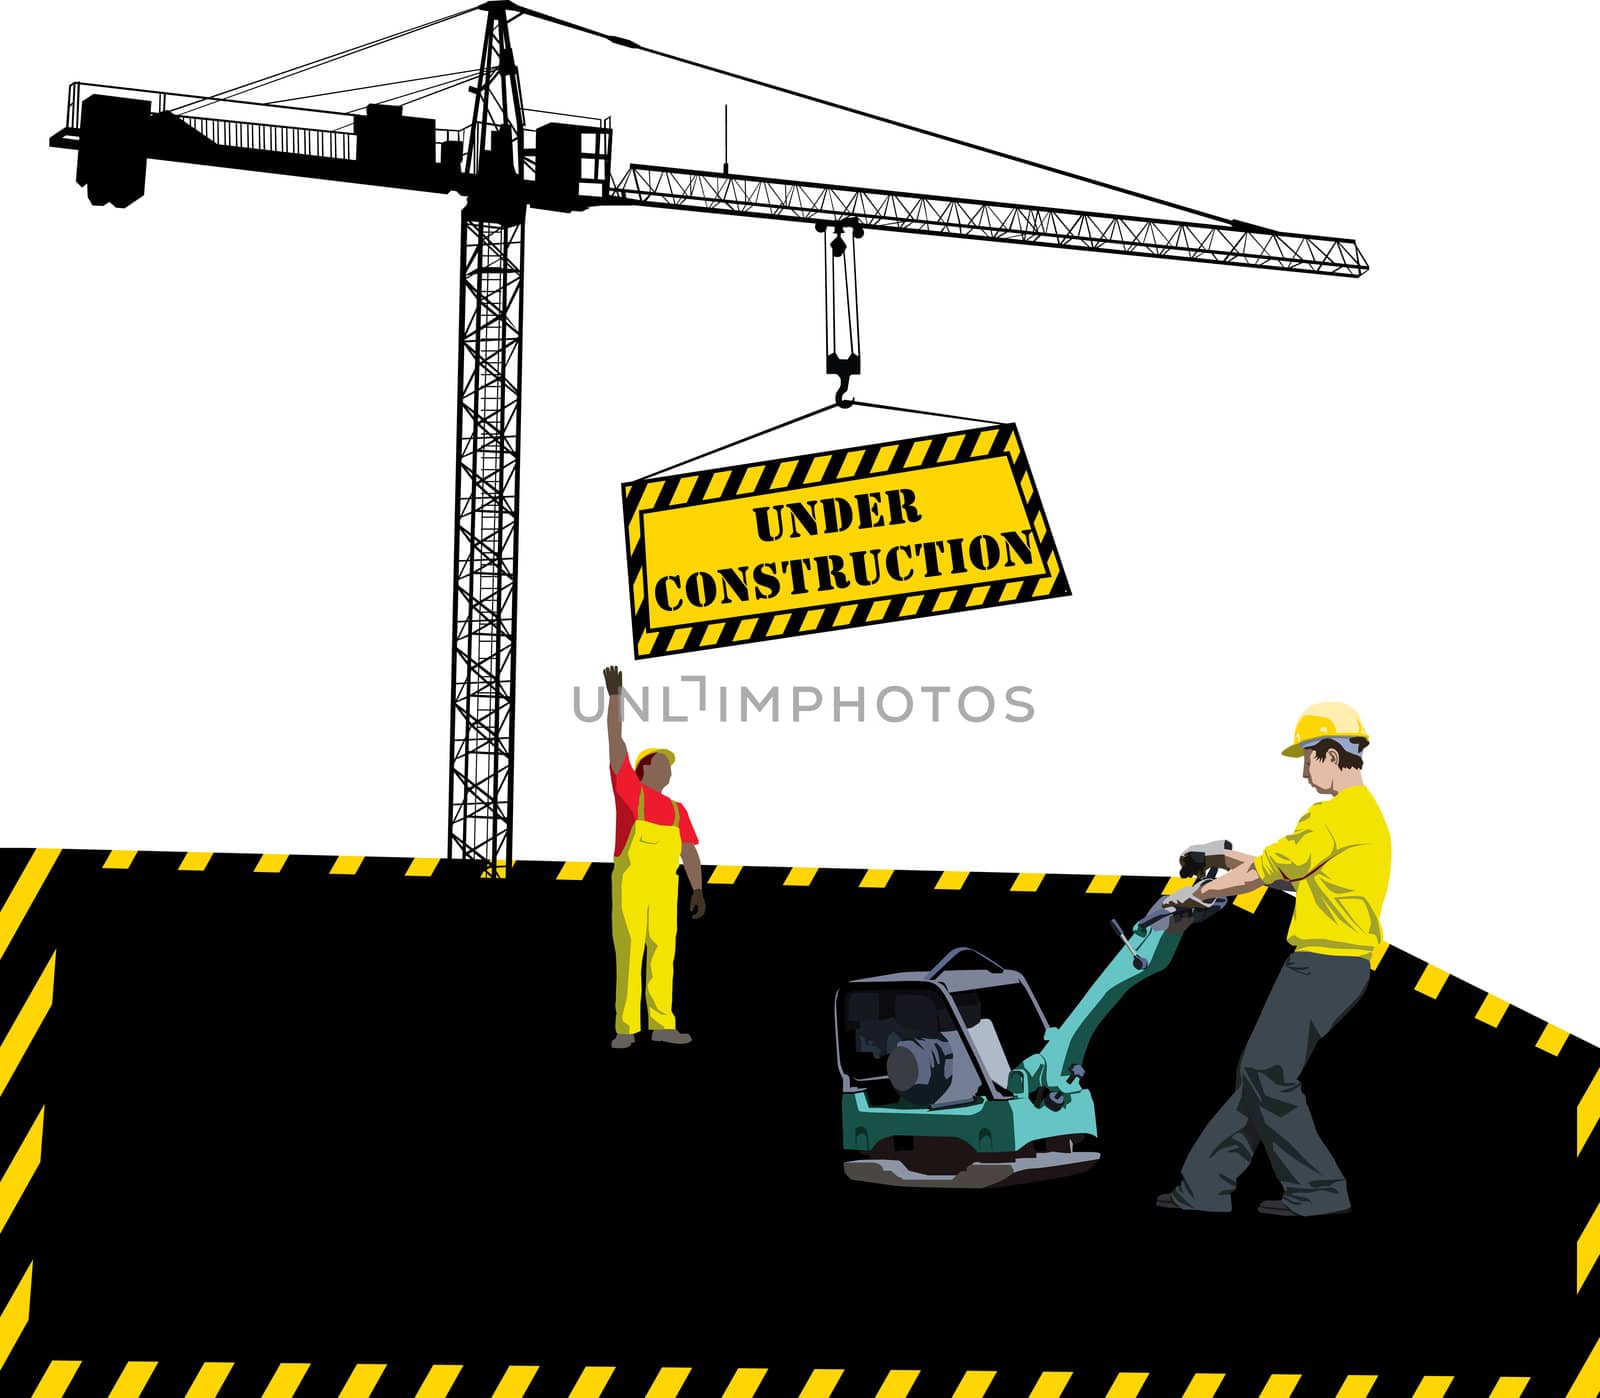 Site under construction with workers and hoisting crane